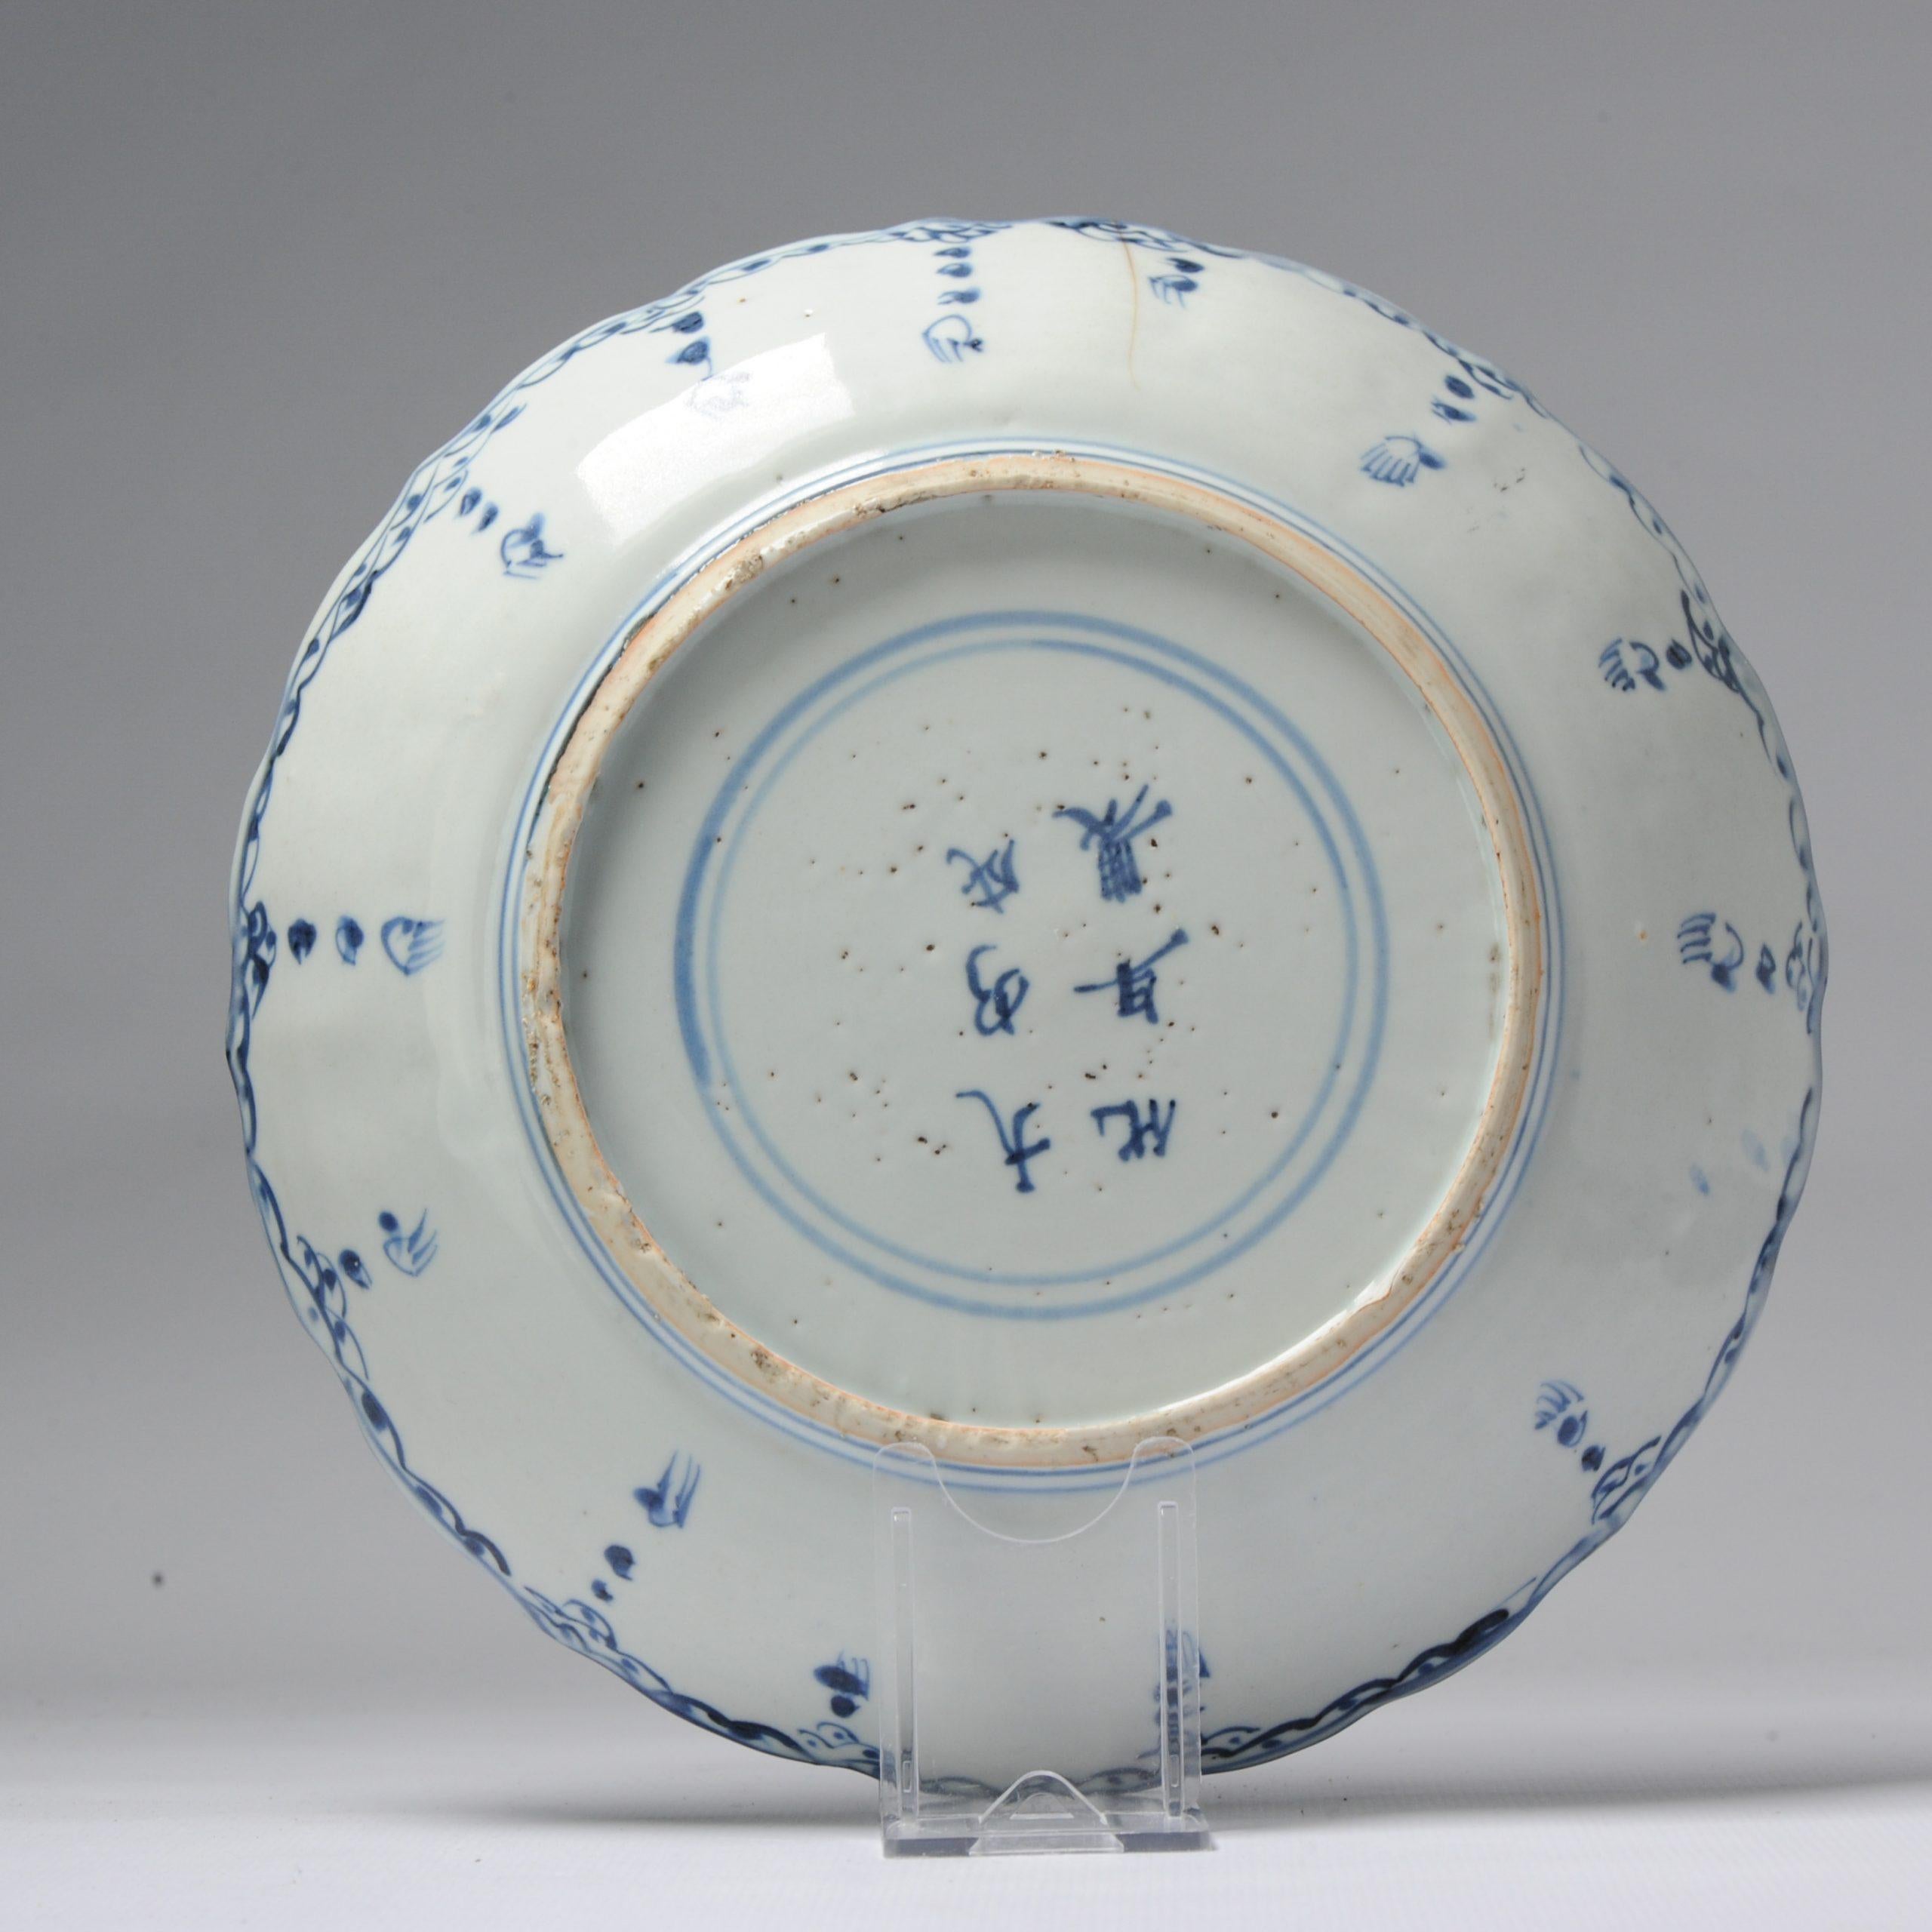 Antique Chinese 17th C Wanli Ming Dynasty Plate Dish Porcelain Chenghua Marked For Sale 6